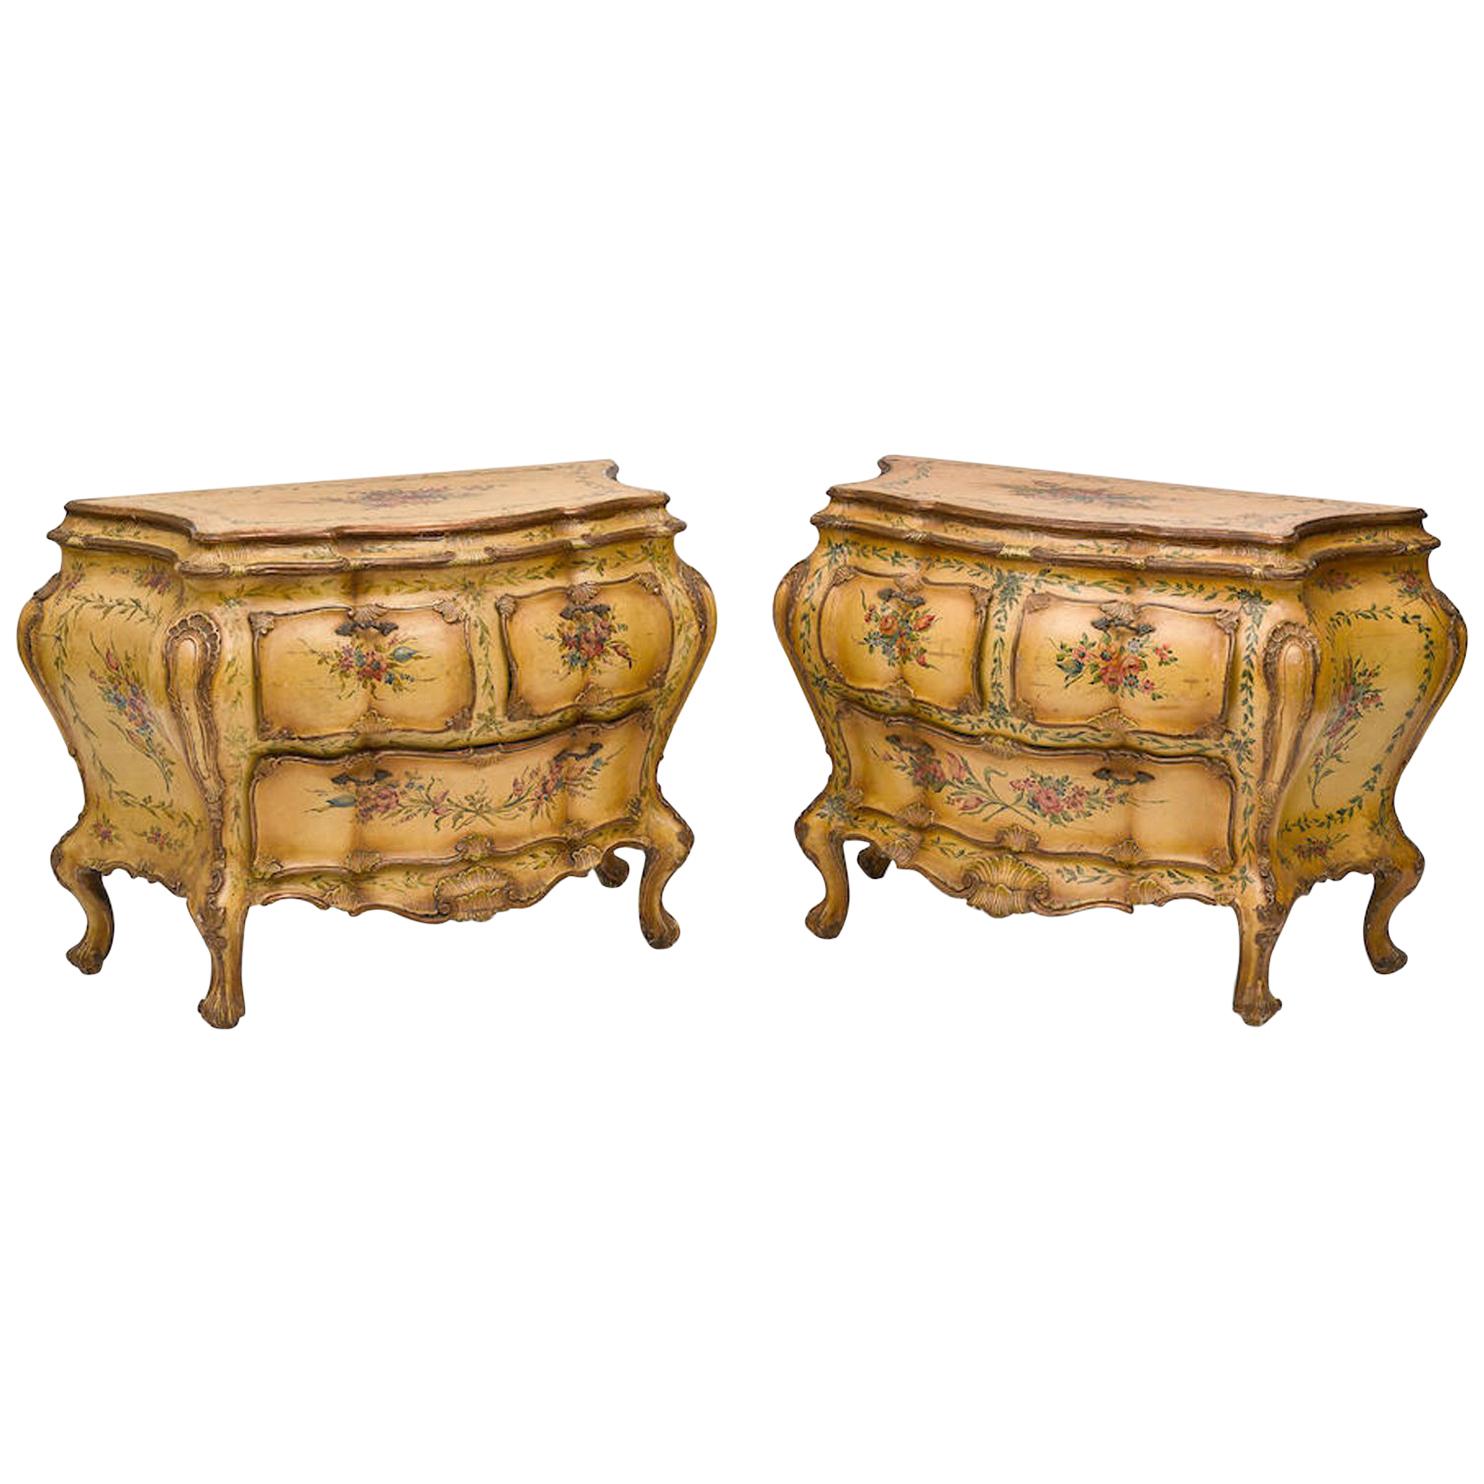 Pair of Italian Rococo Style Hand Painted Commodes, Late 19th Century